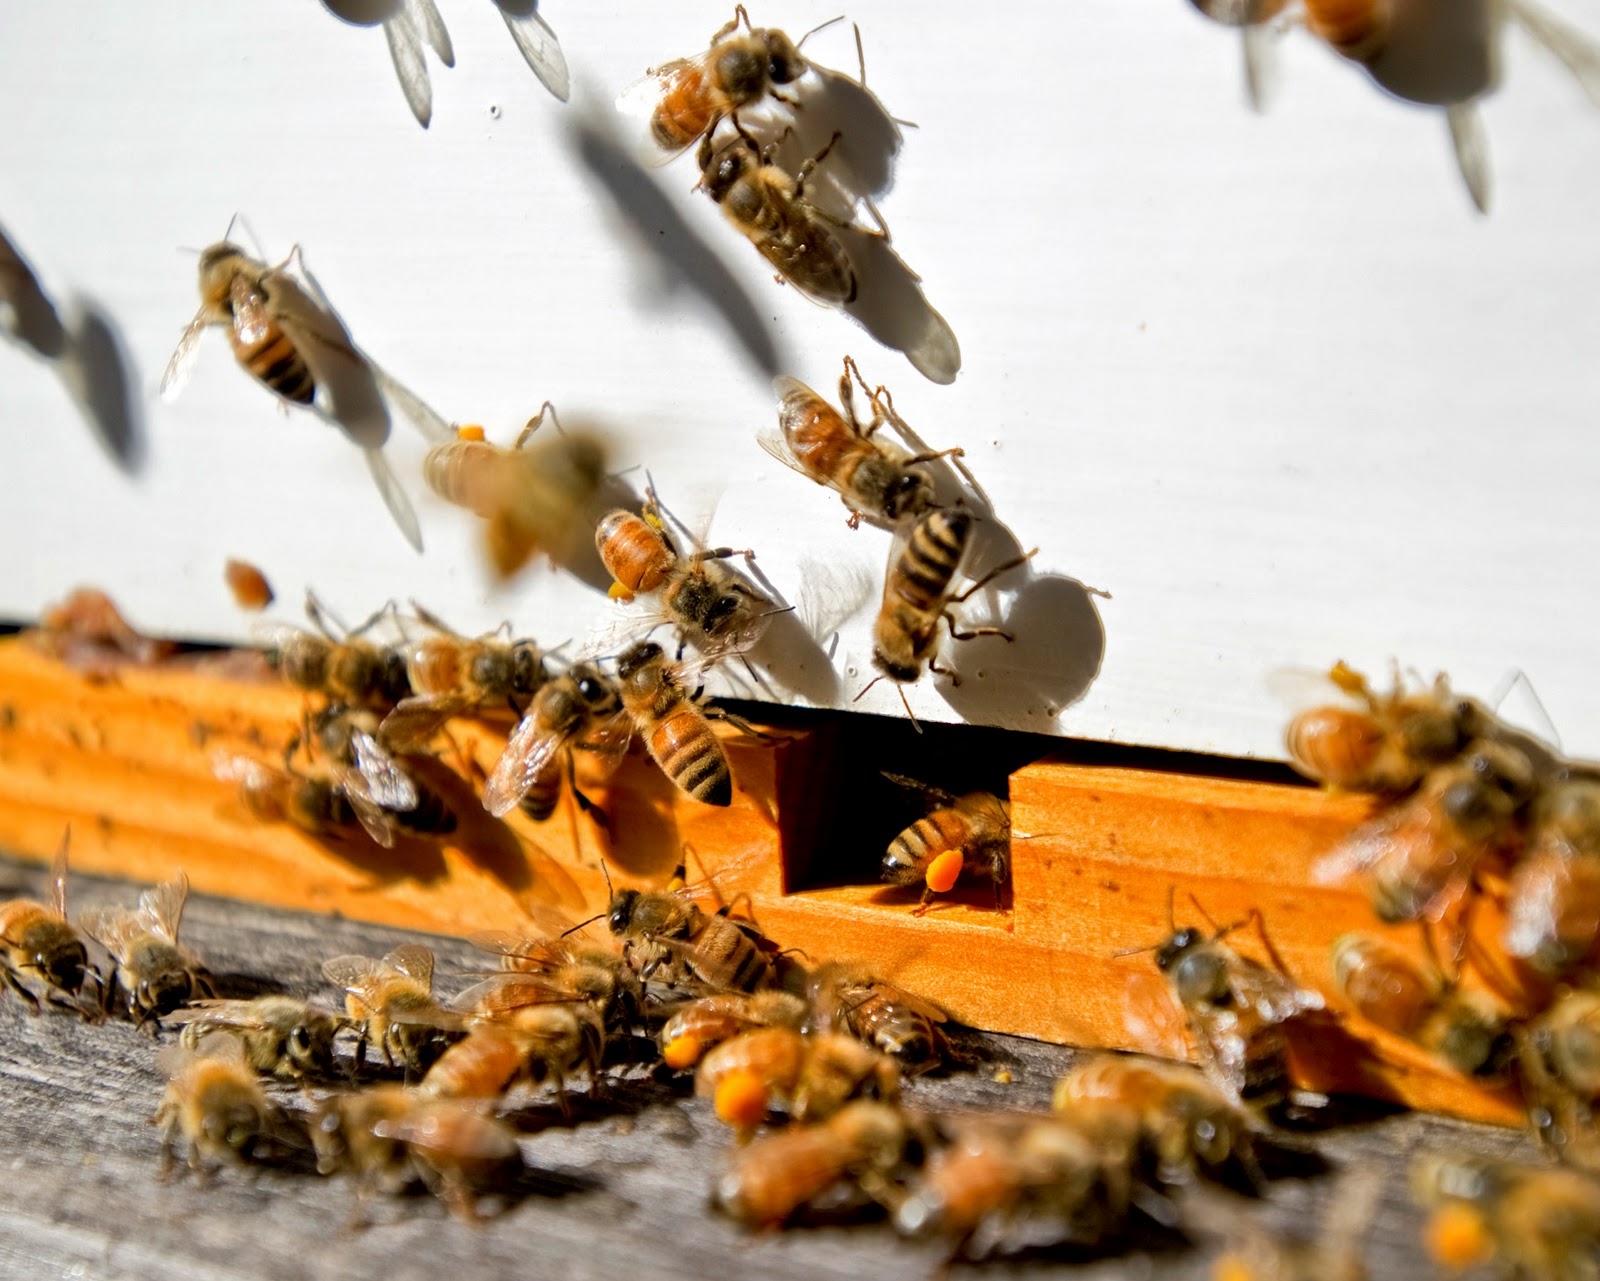 Bees entering bee hive photo